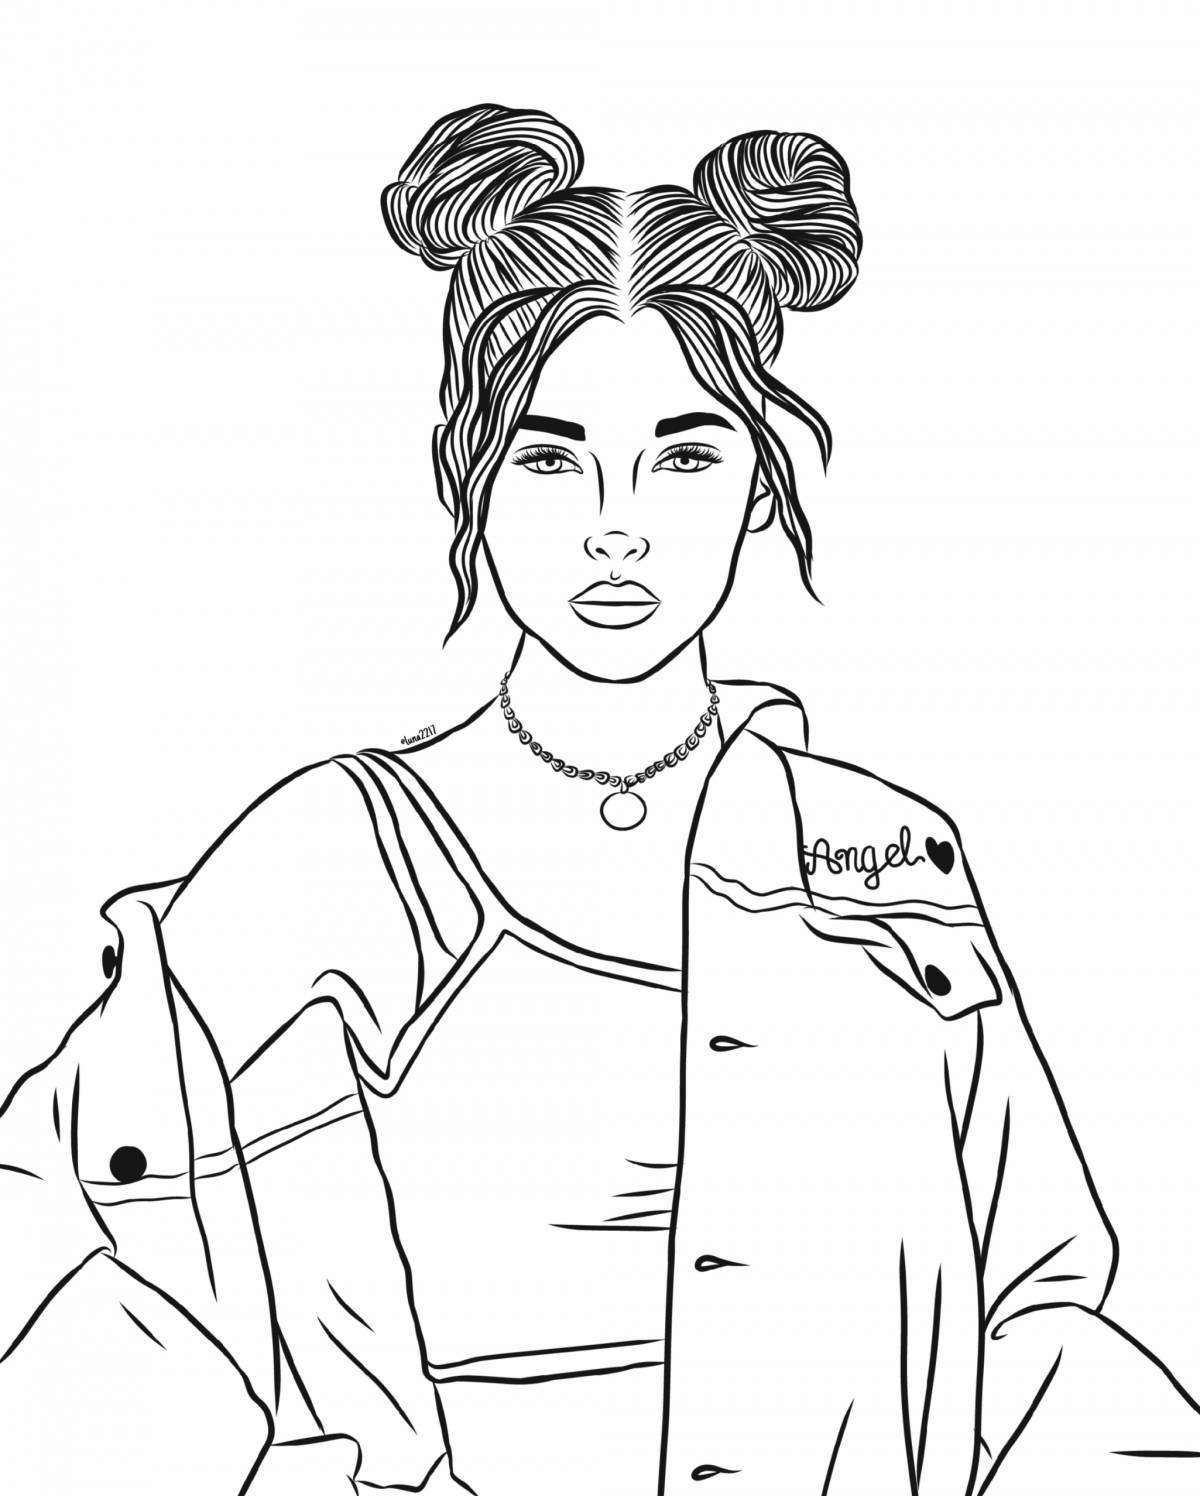 Coloring page charming fashionista